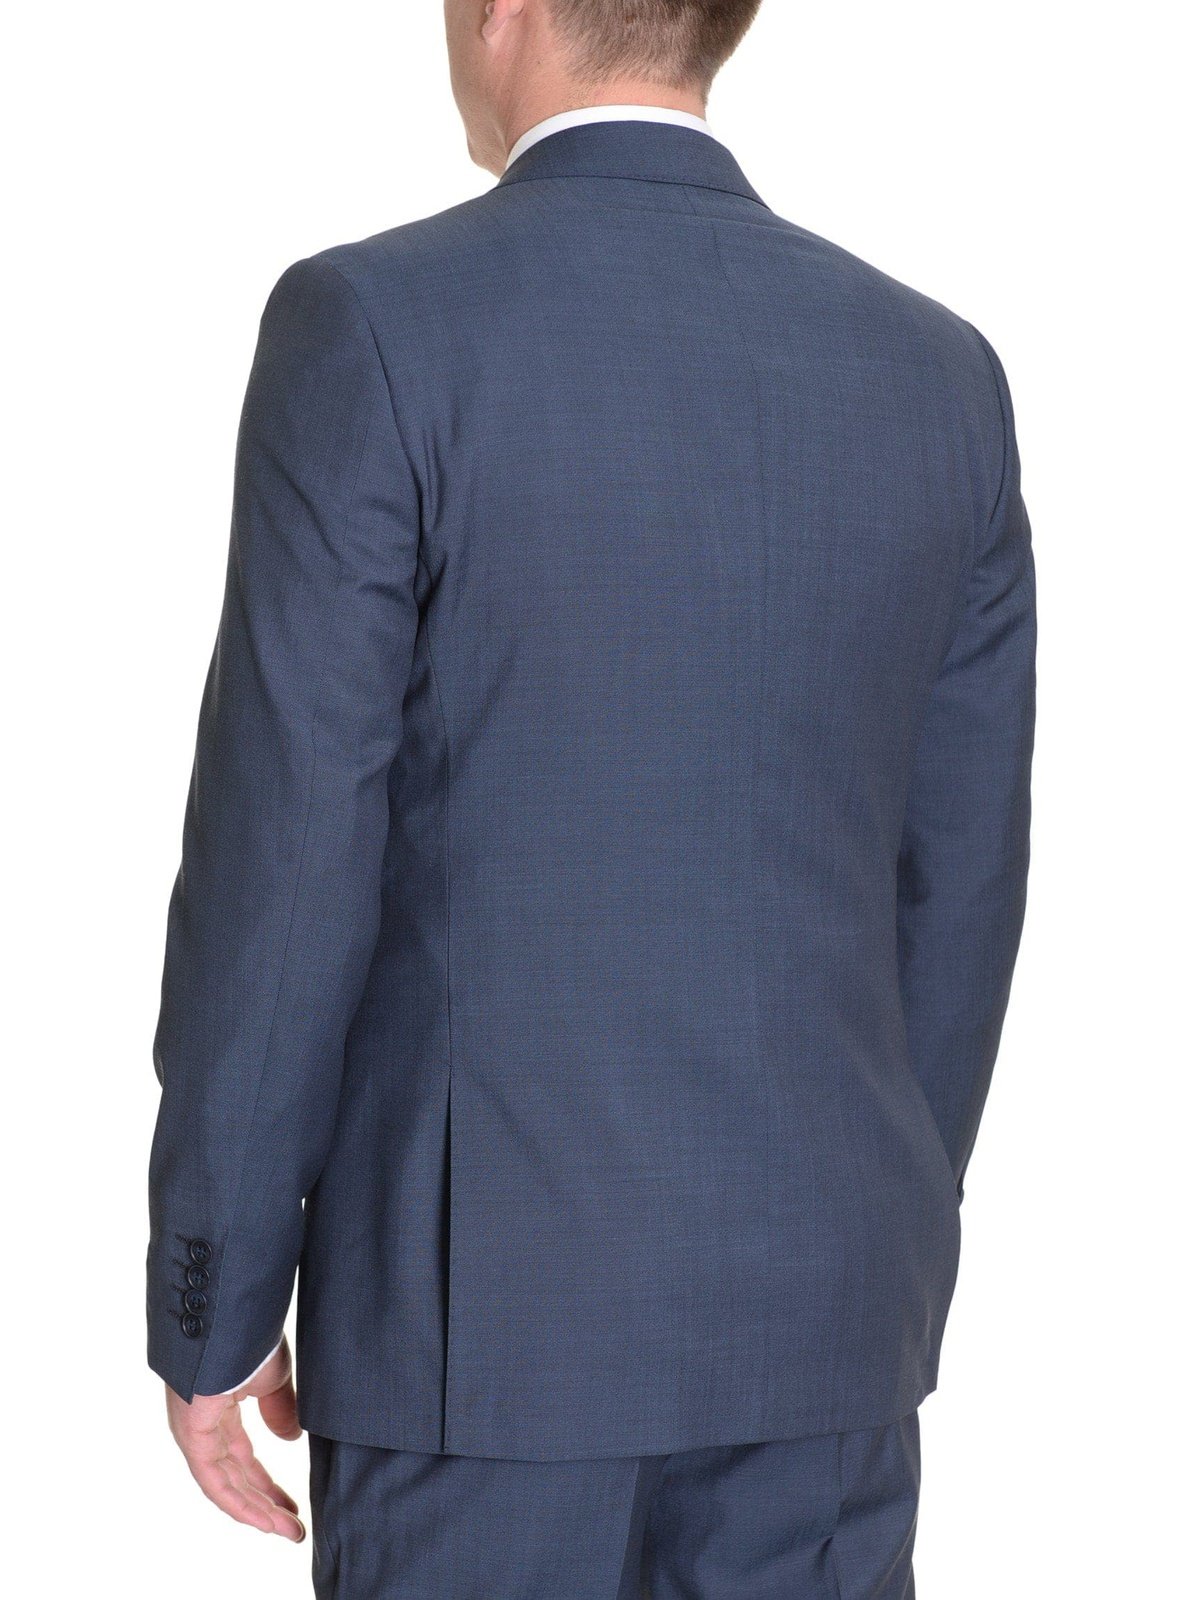 London Fog TWO PIECE SUITS Extra Slim Fit Solid Heather Blue Two Button Wool Suit